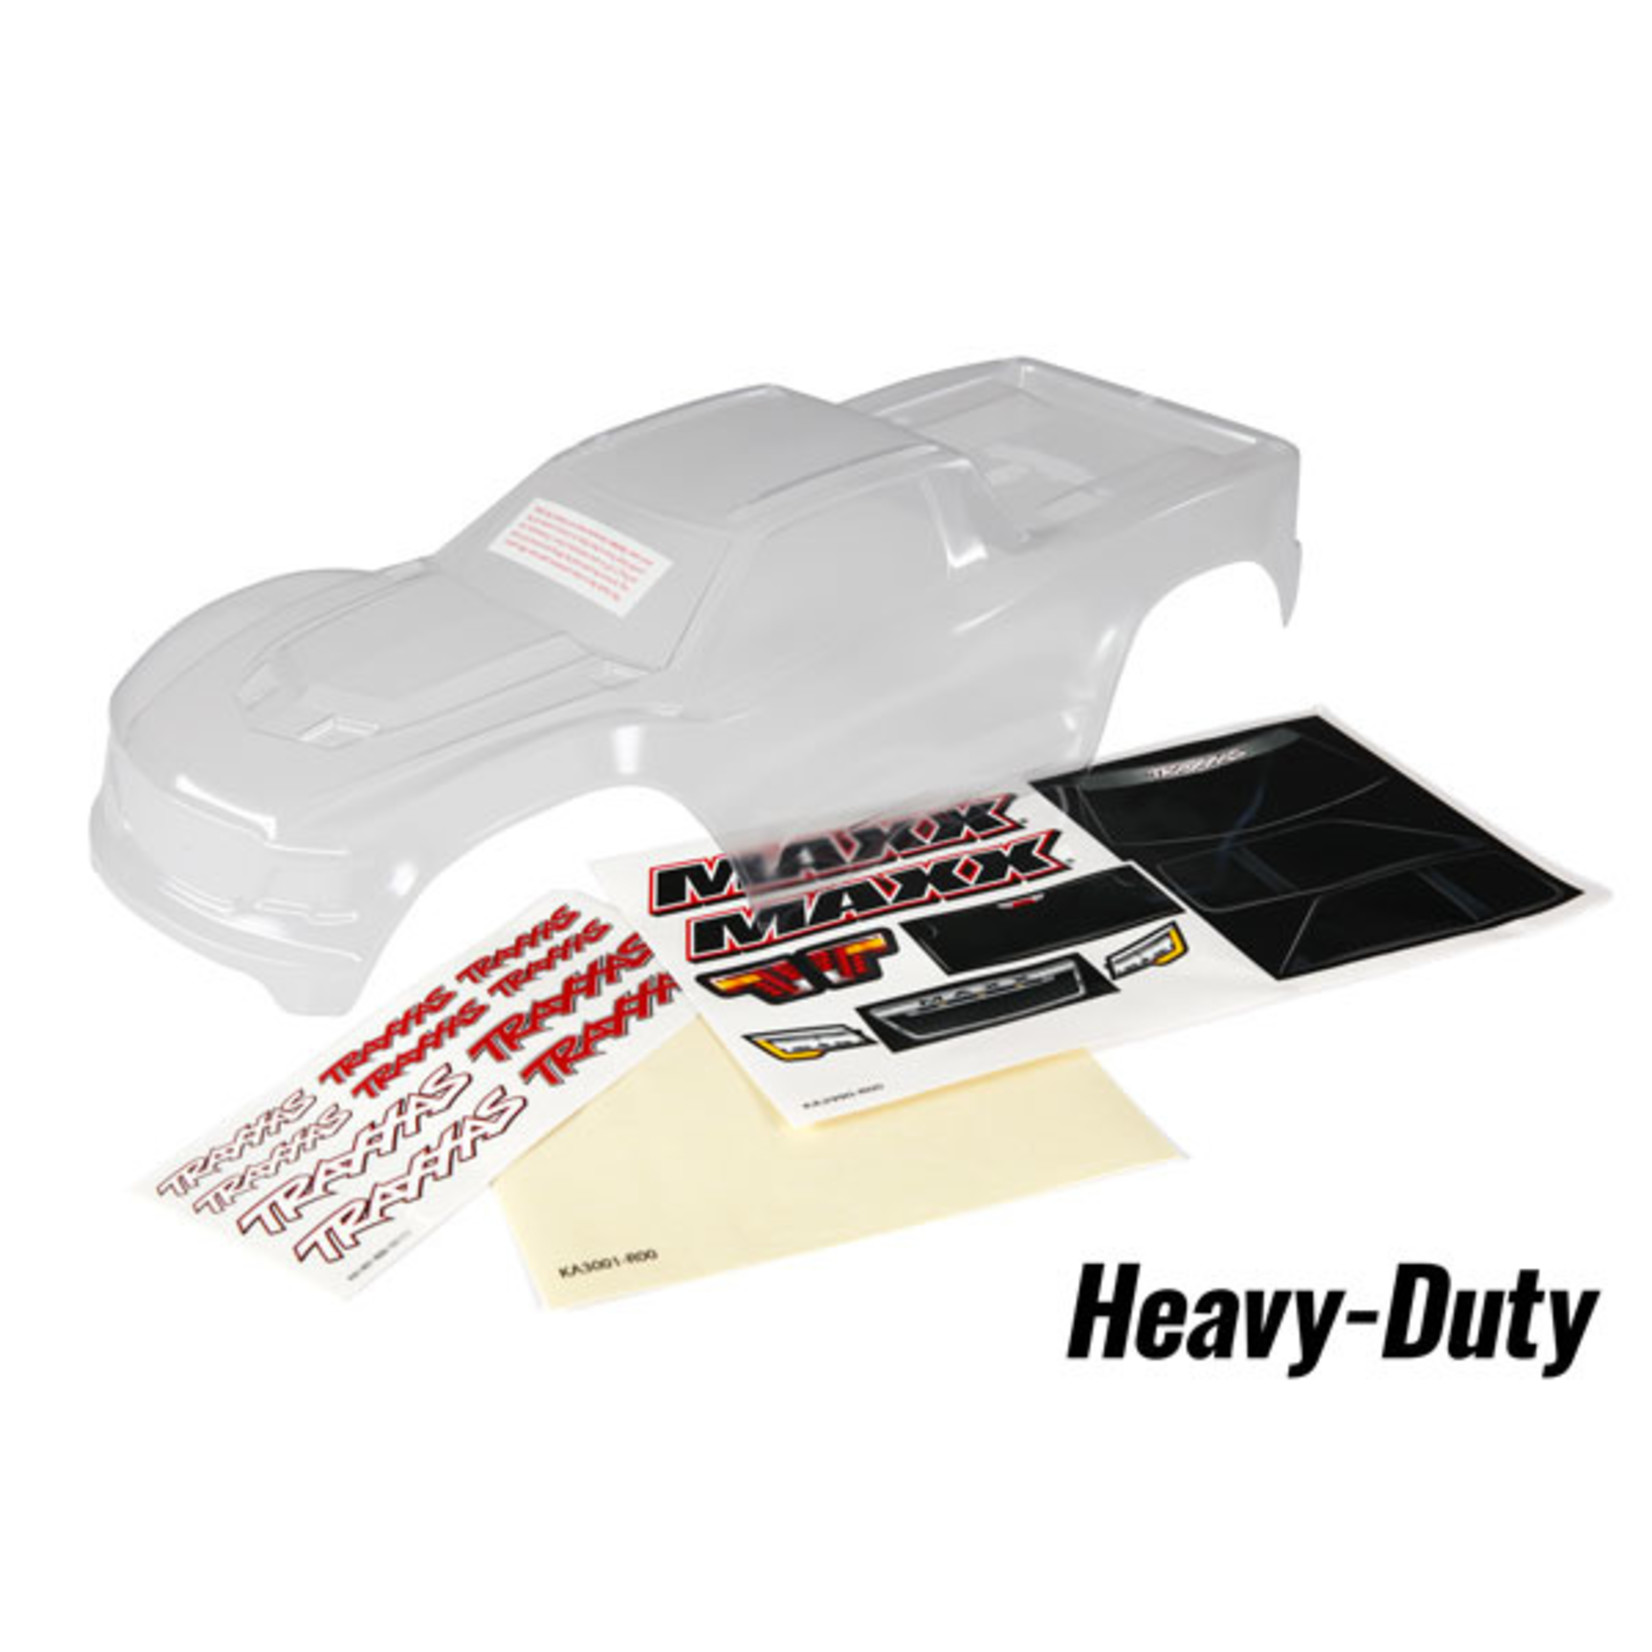 Traxxas 8914 - Body, Maxx, heavy duty (clear, requires painting